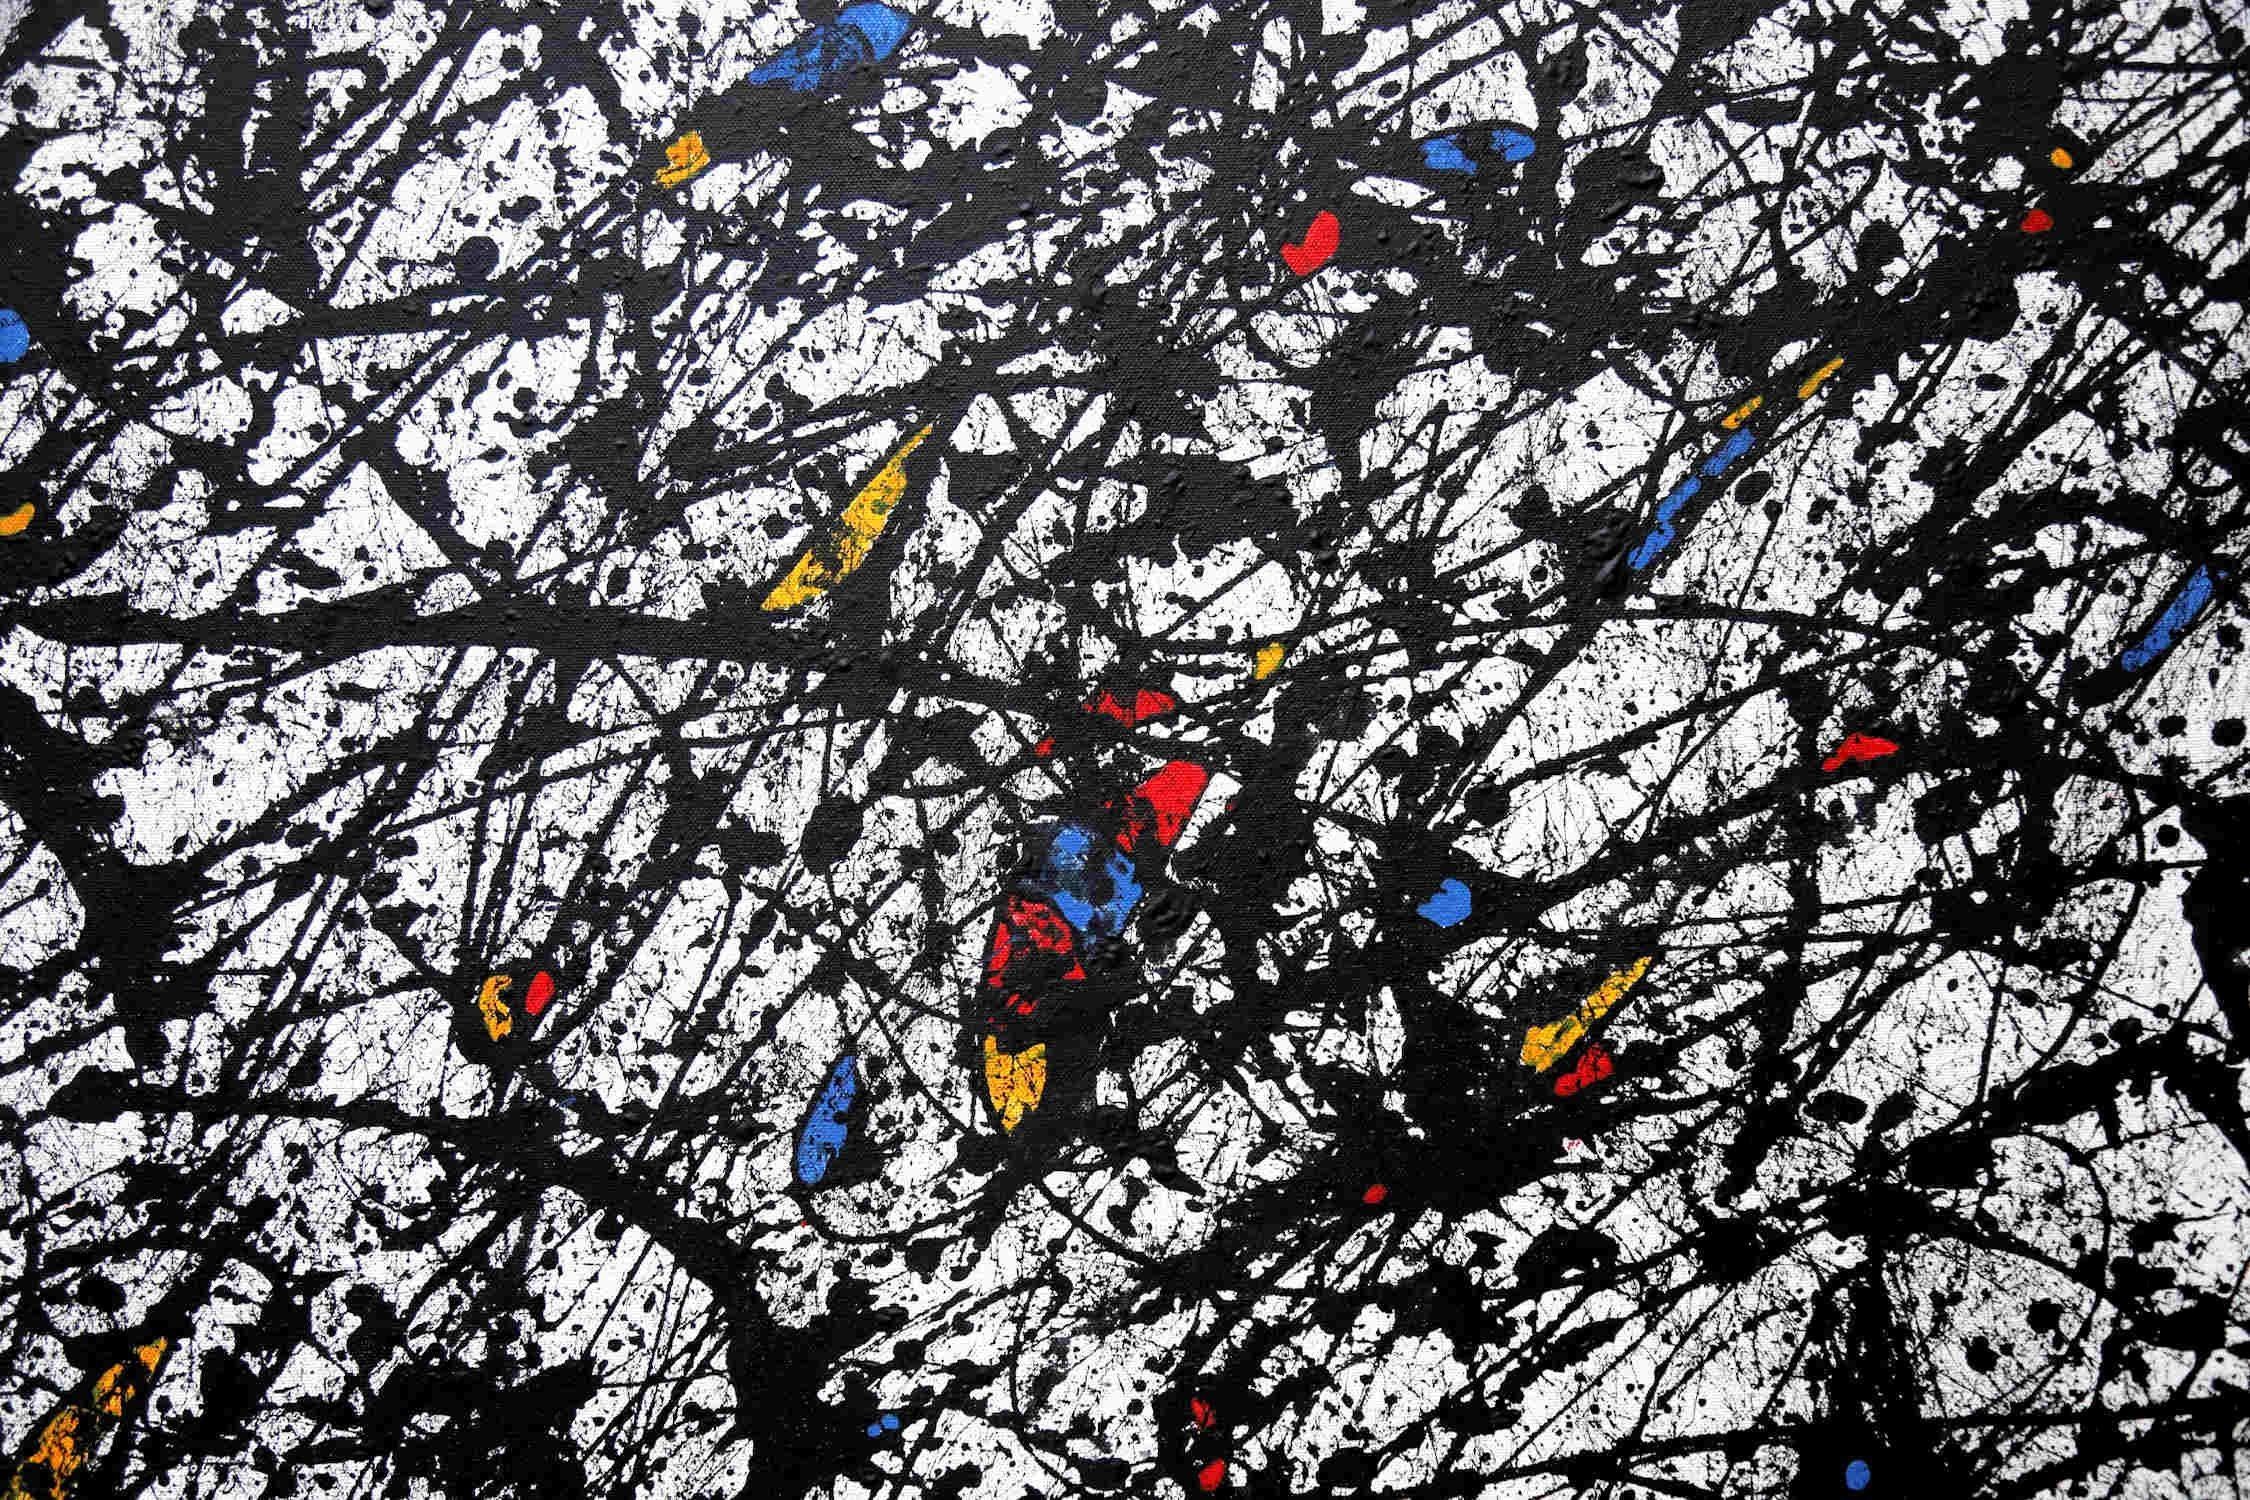 A large abstract painting in Black and White tones with primary highlights. Minimalist simplicity, Jackson Pollock inspired with a touch of Mondrian colour. A wonderful highlight and focal point for a feature wall, perhaps above a bed or sofa,